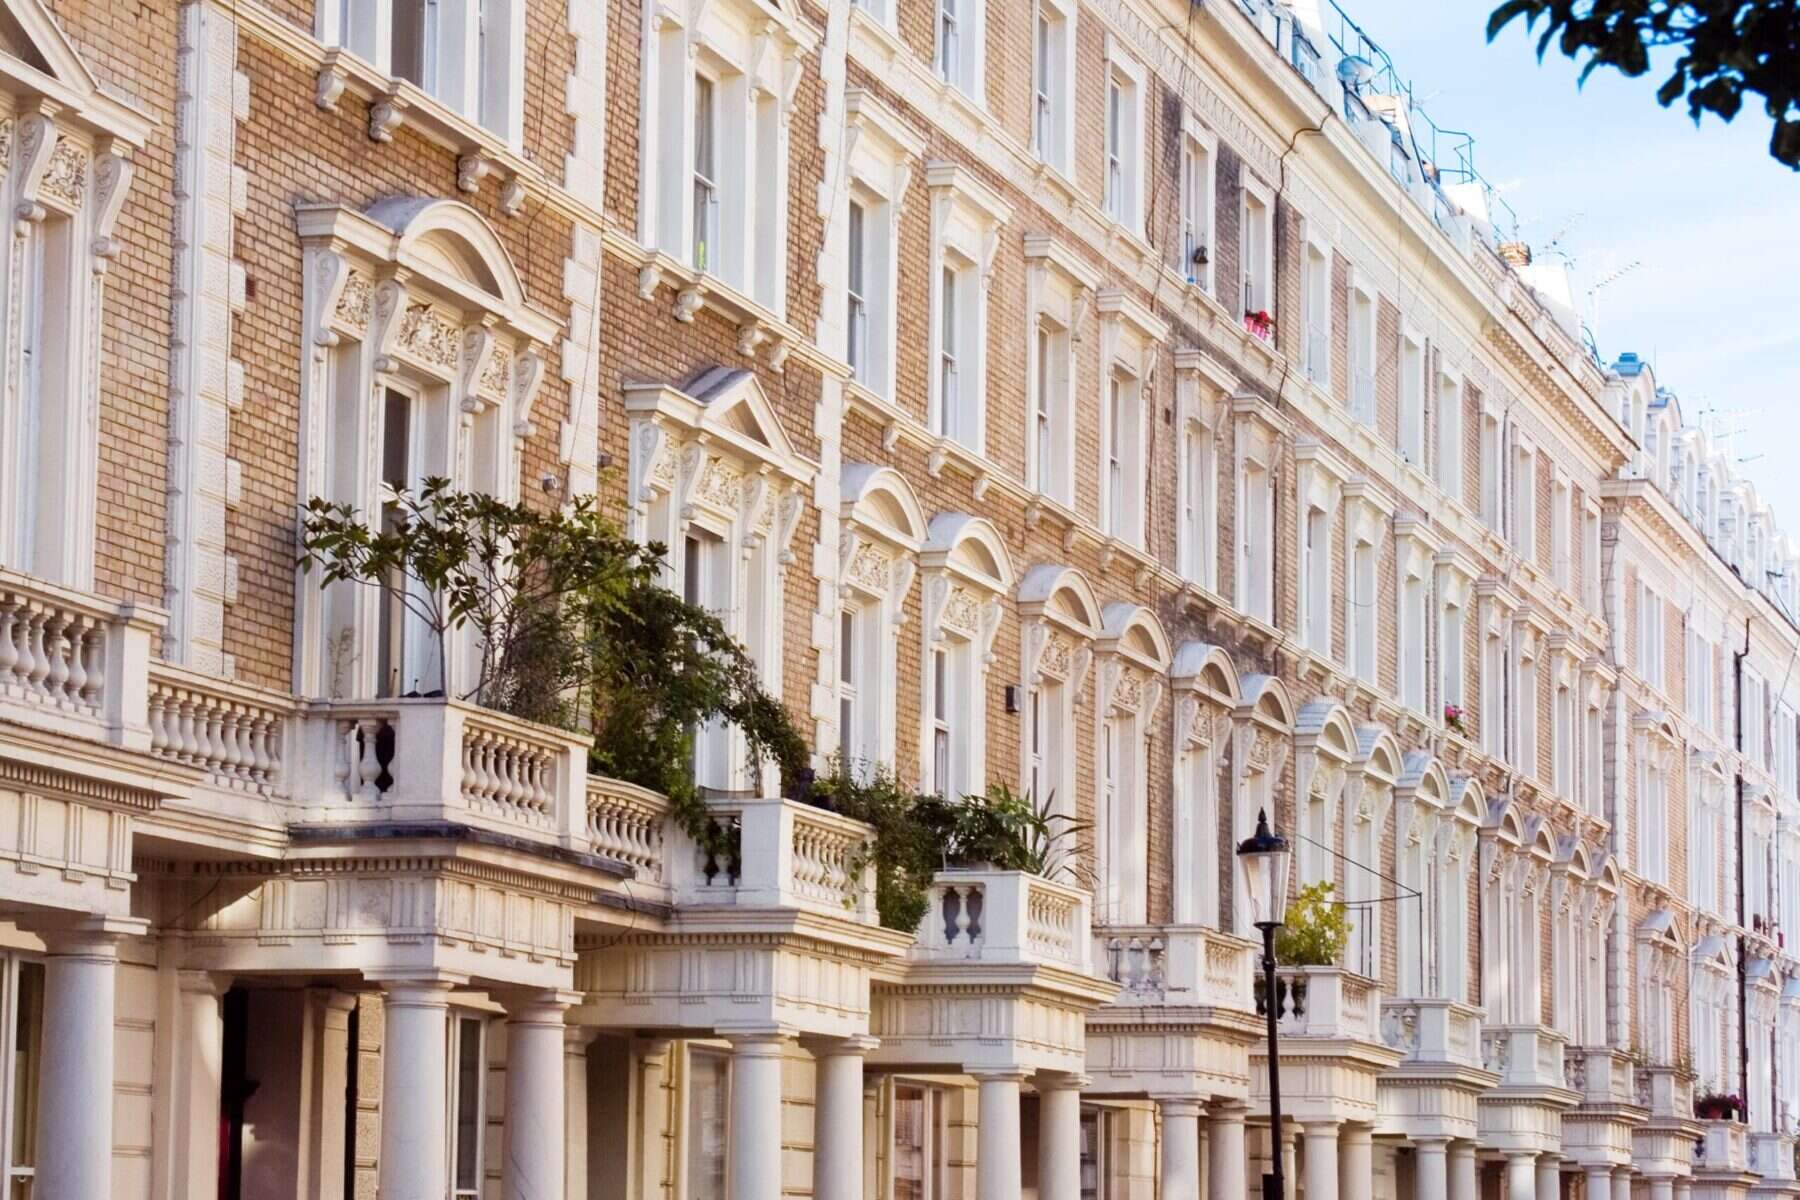 Premium London Property More in Demand Than Ever